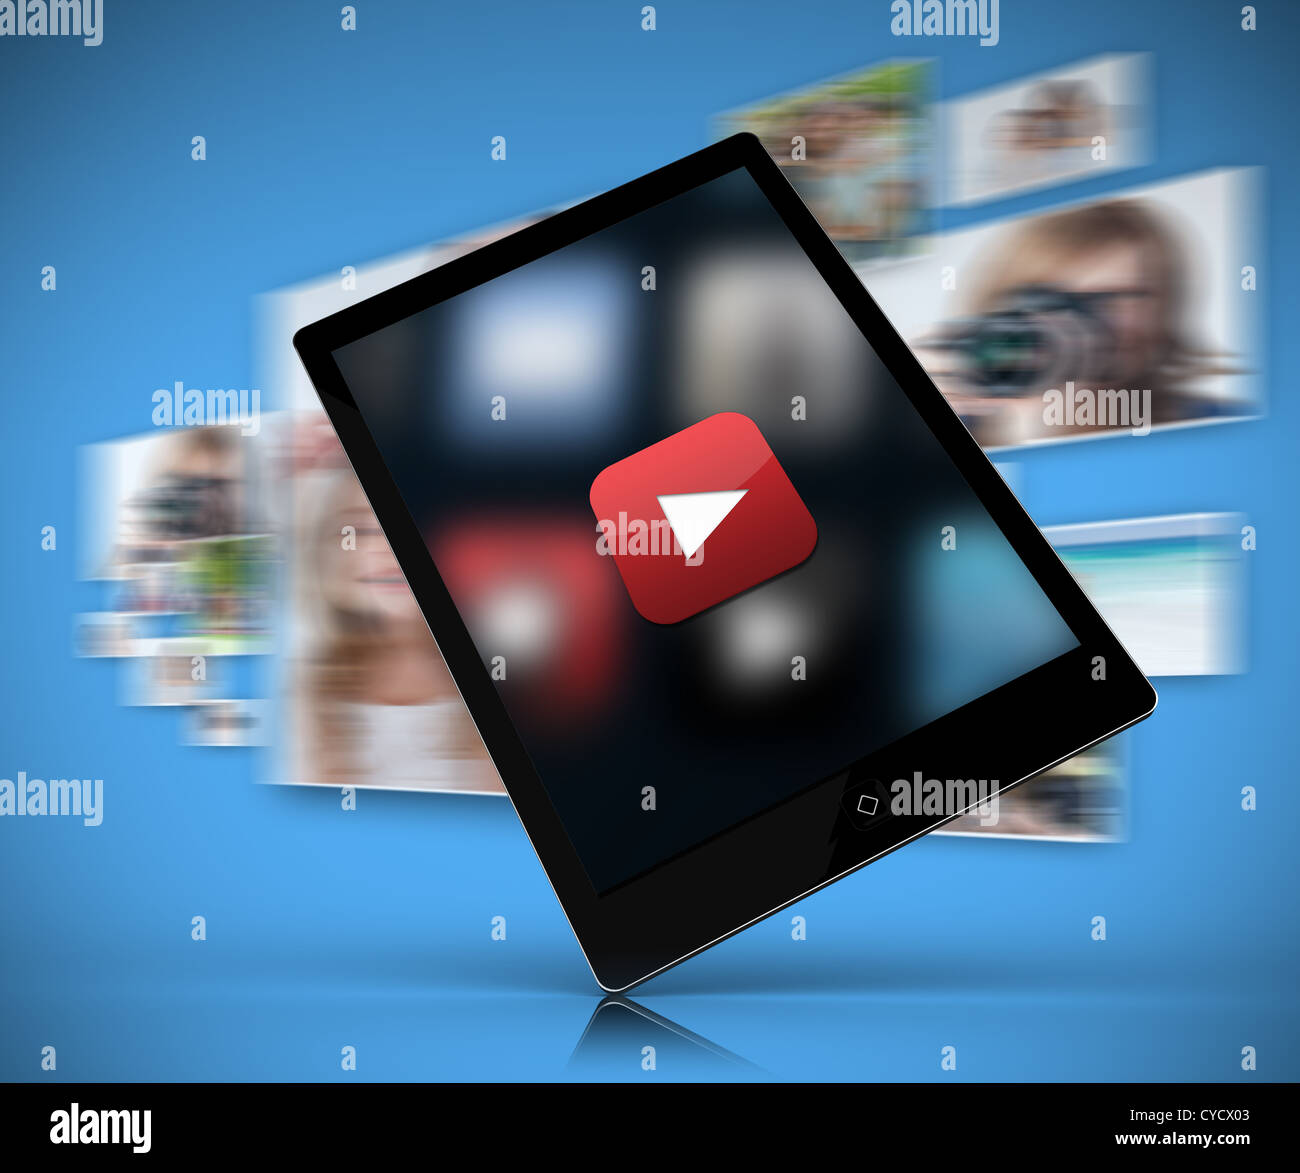 Tablet pc showing play button against blue background Stock Photo